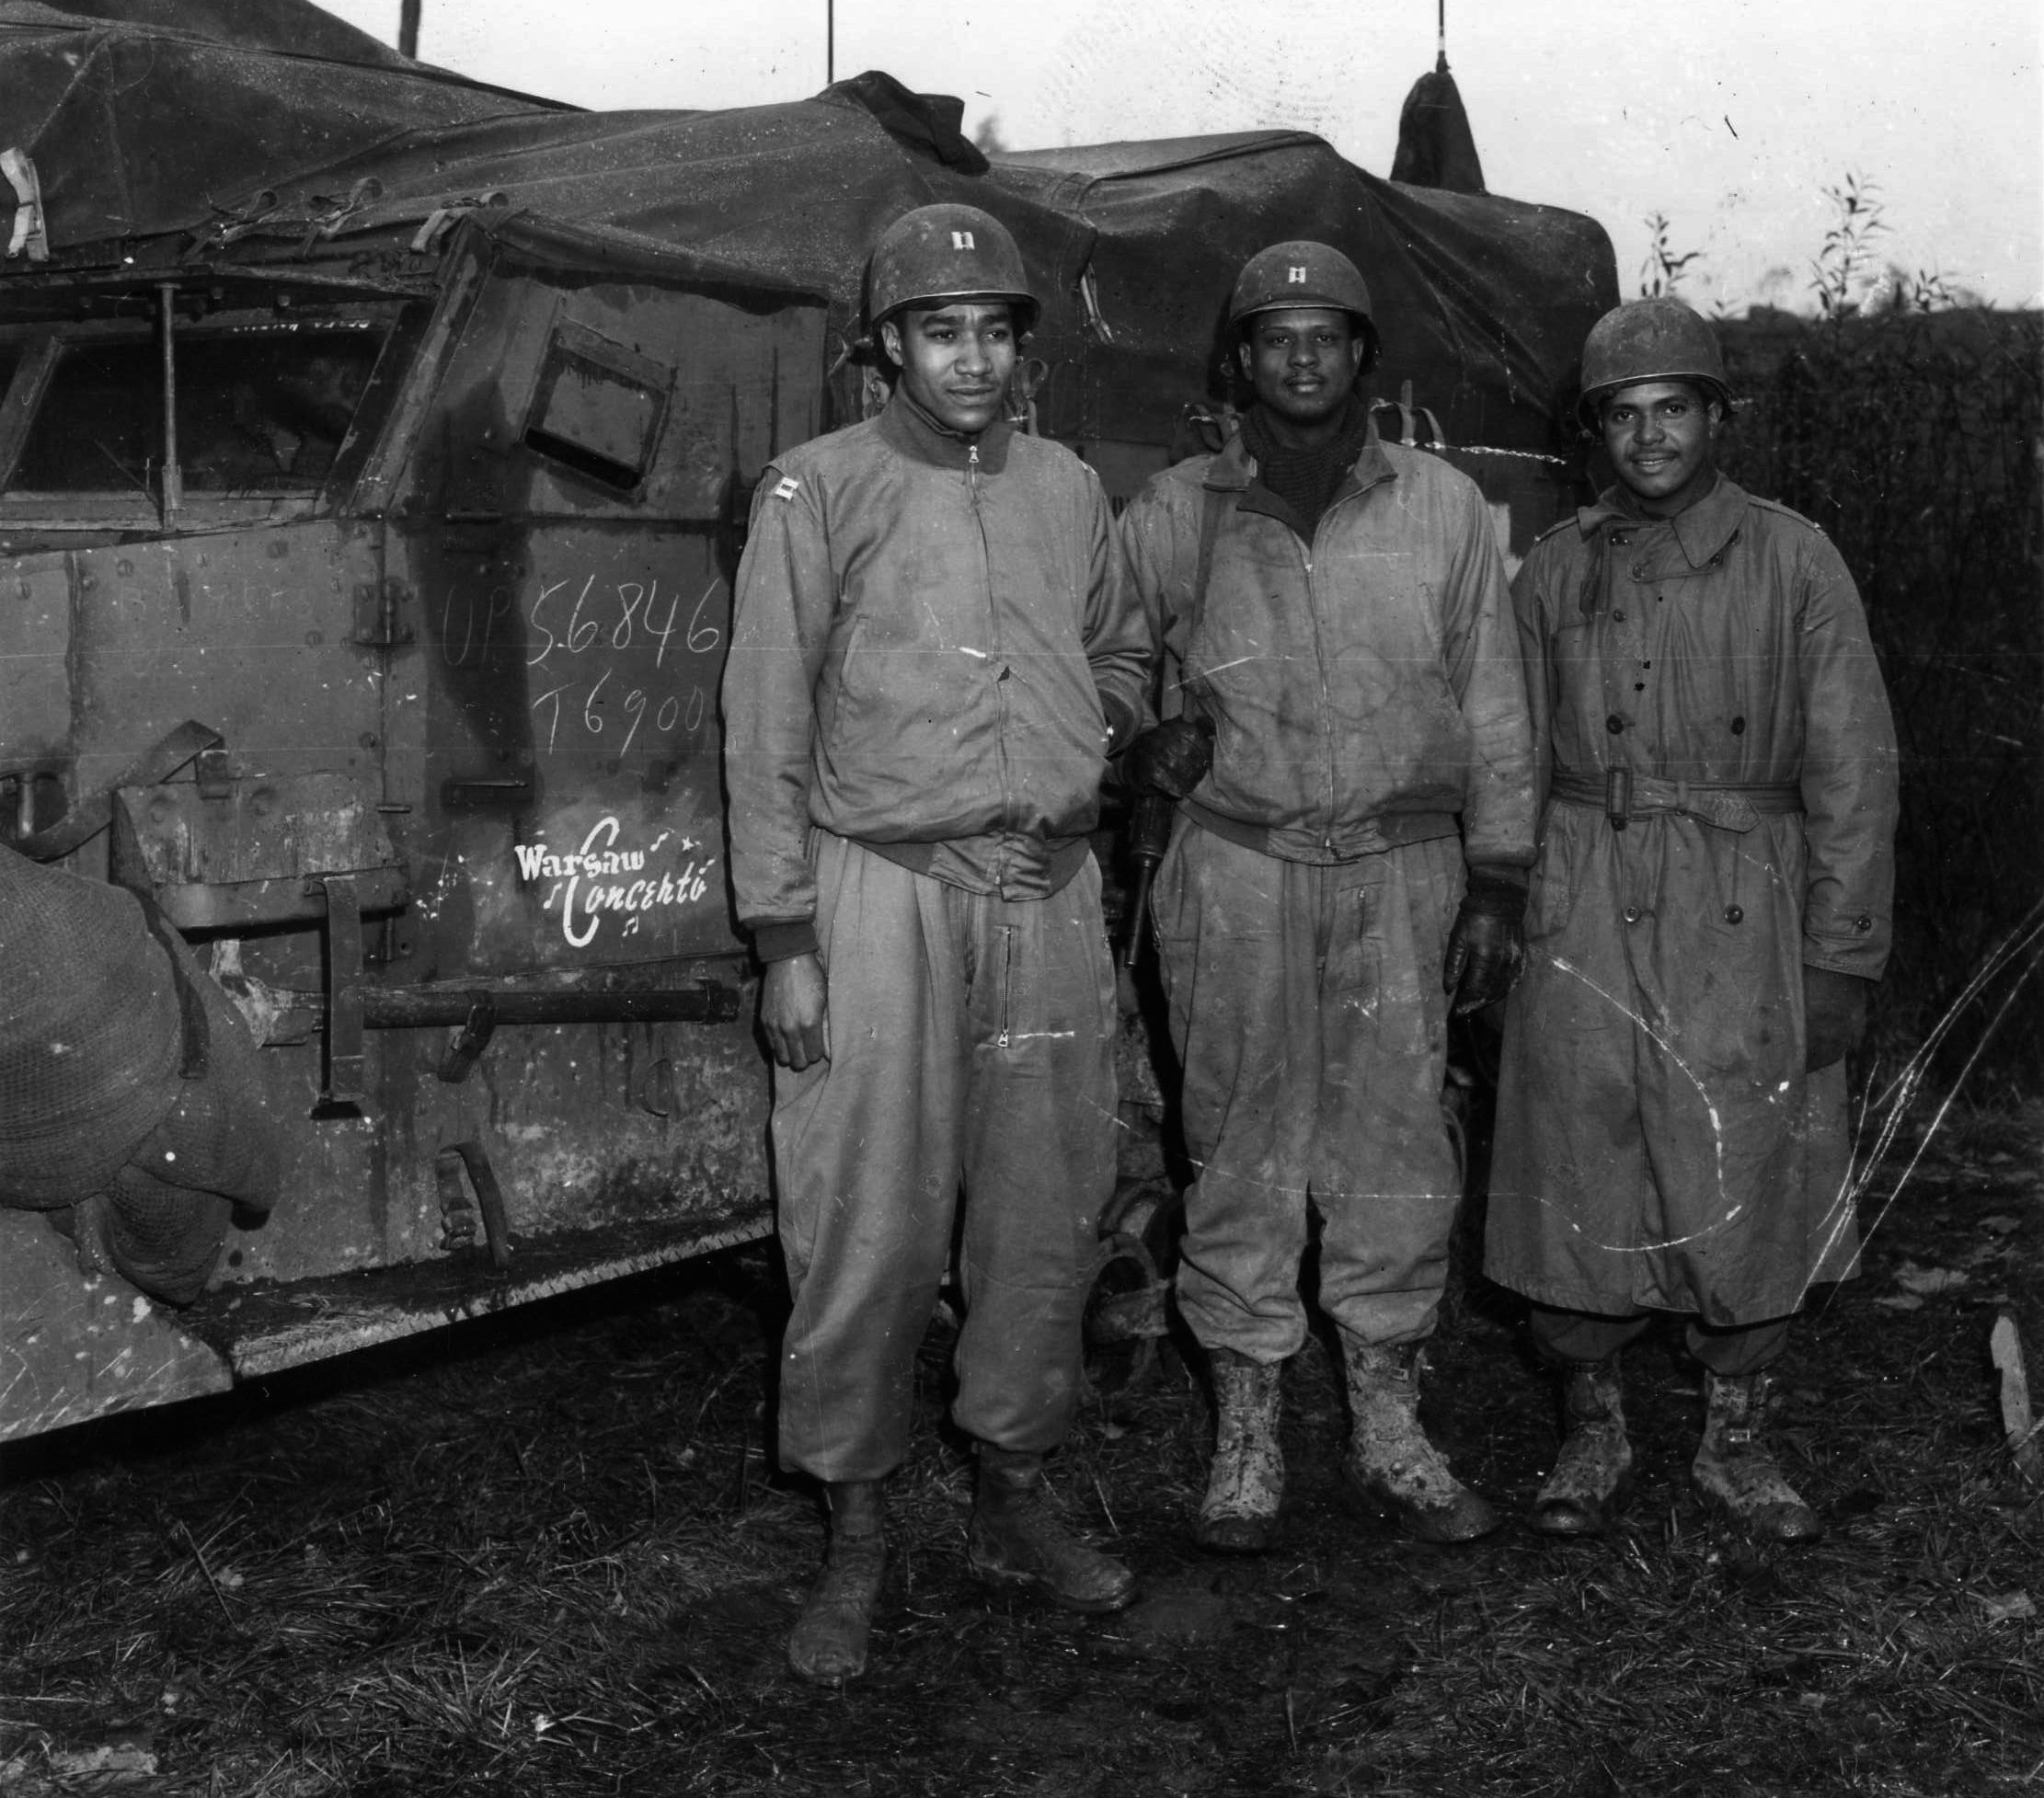 Field officers of the 761st Tank Battalion pause during preparations for upcoming action near Nancy, France, on November 5, 1944. The officers are (left to right) Captain Ivan Harrison, Captain Irvin McHenry, and 2nd Lieutenant James Lightfoot. 